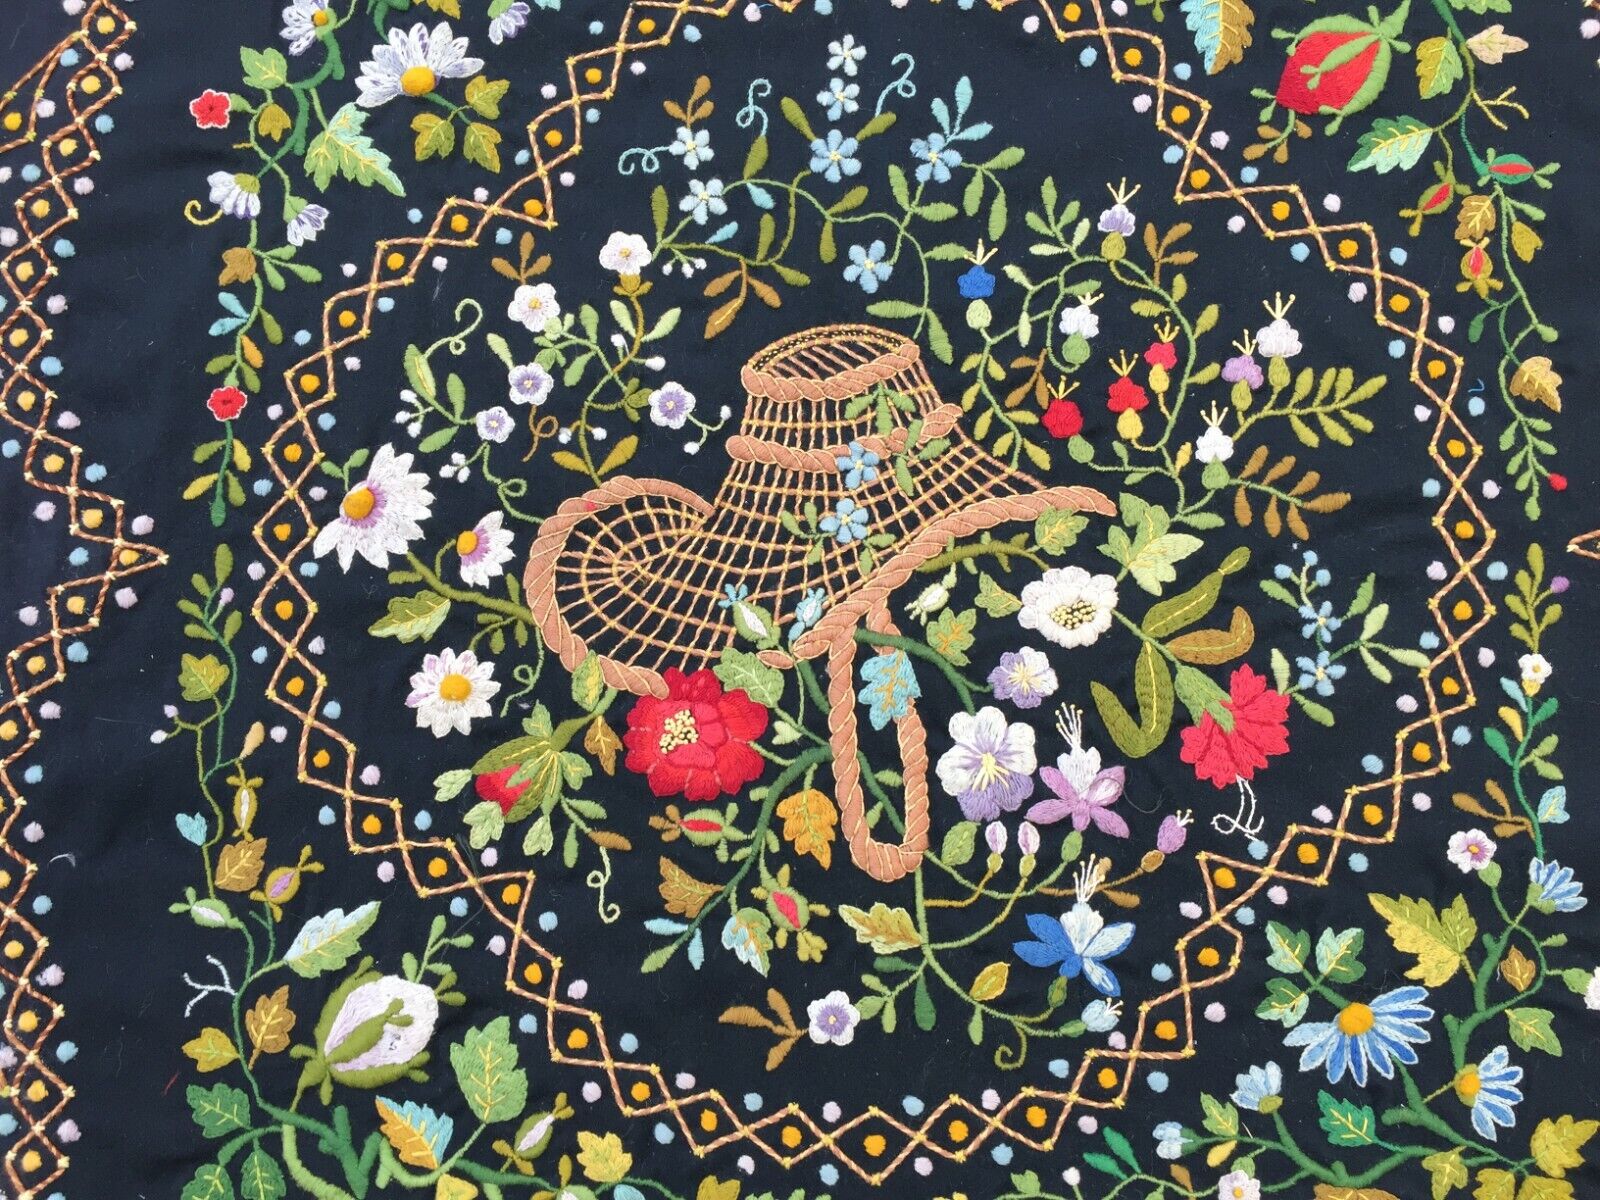 Close-up of the floral designs in various colors, showcasing the craftsmanship